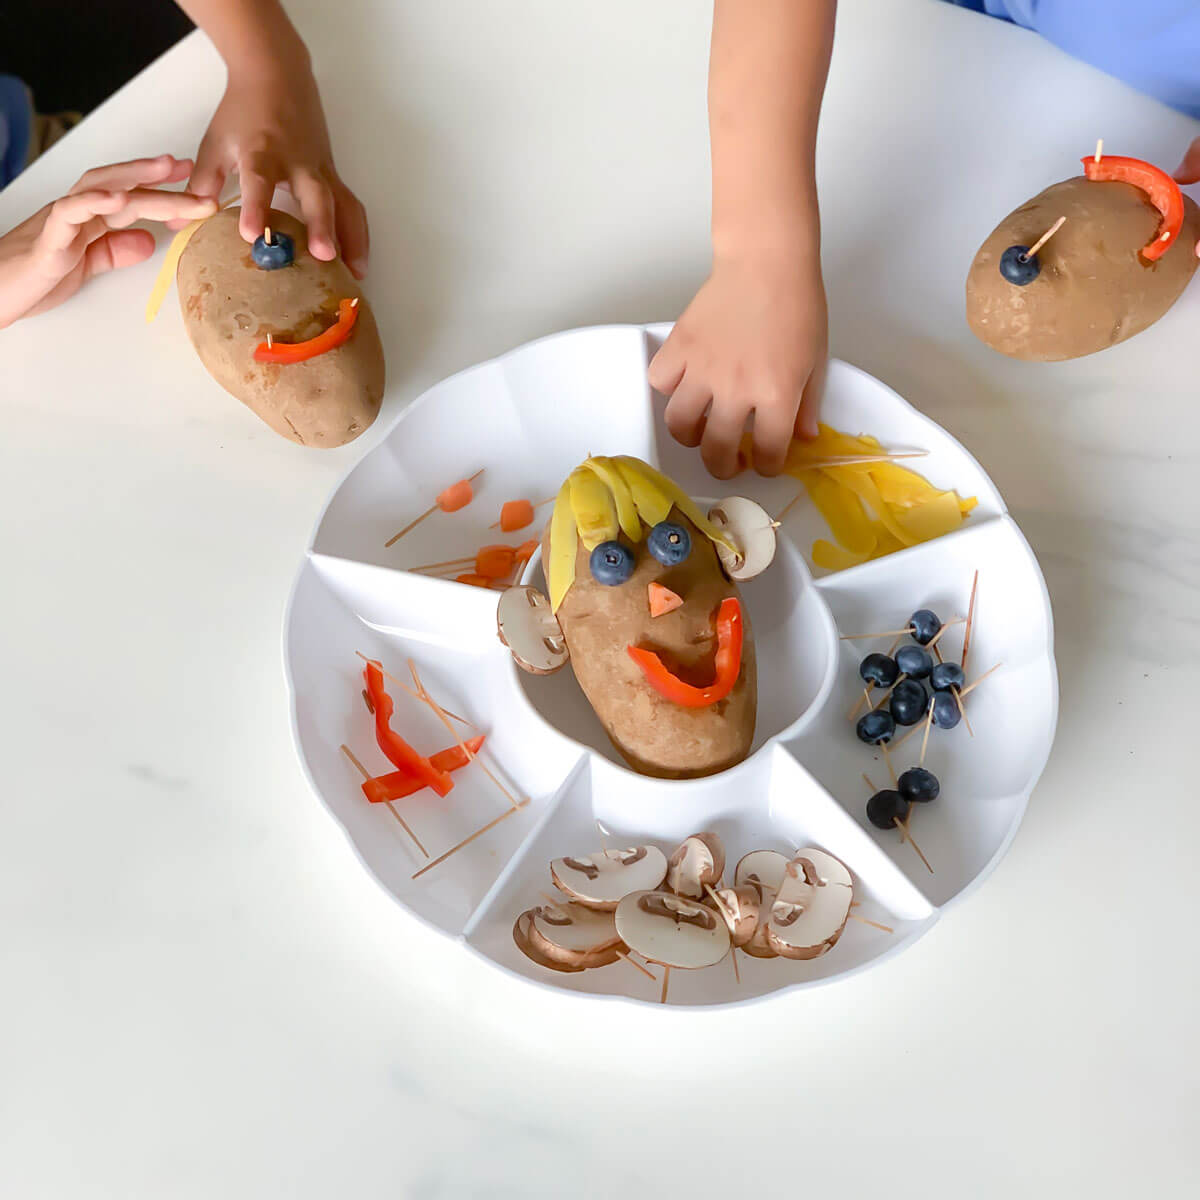 Food Activity for Kids – The Real Life Mr. Potato Head